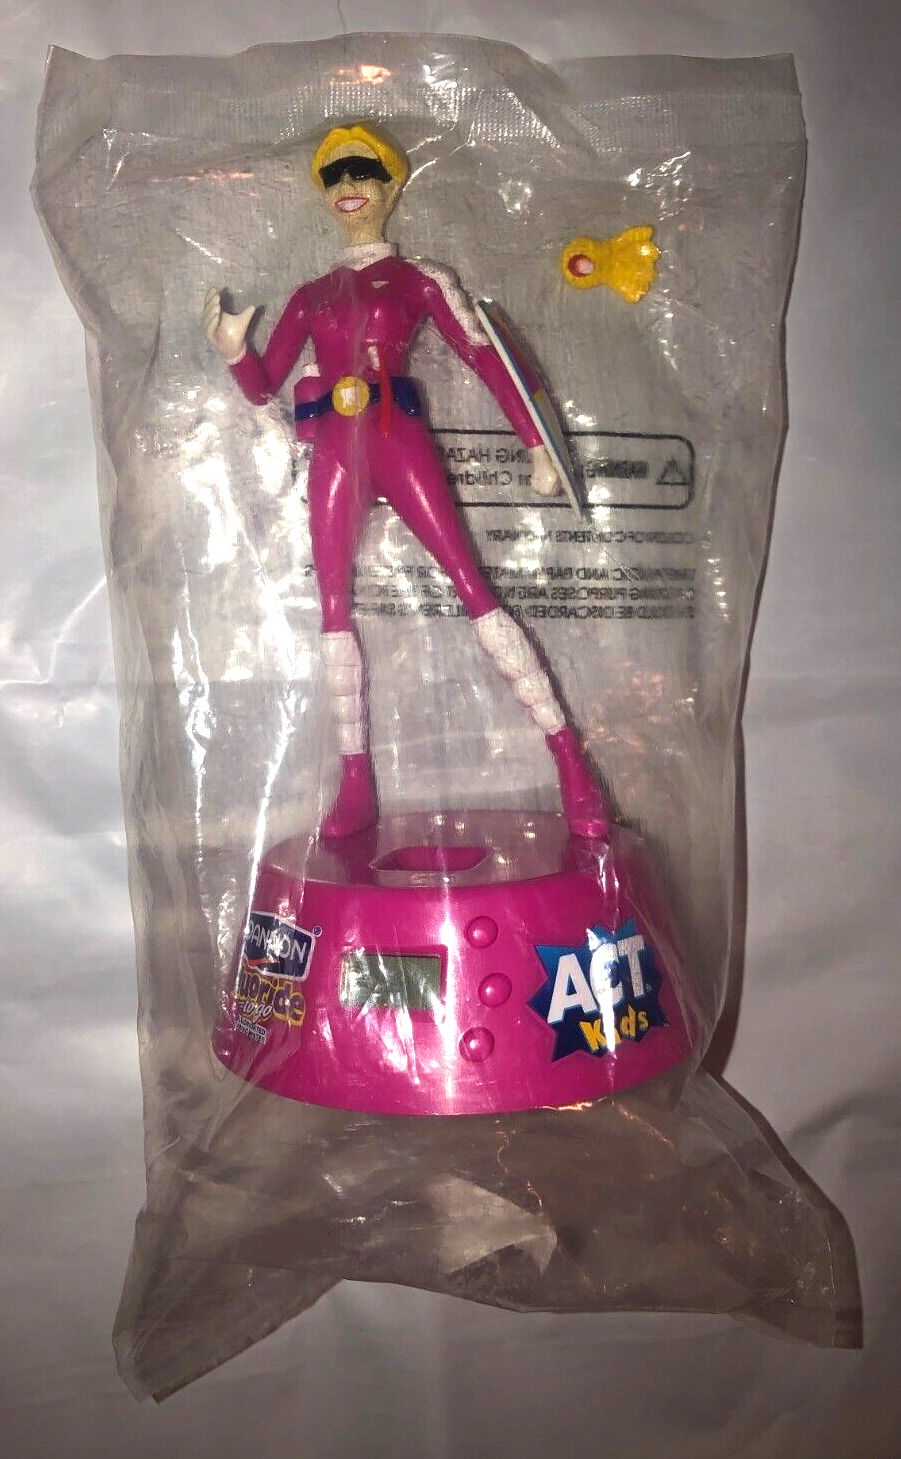 Dannon Spring Water Fluoride Force Advertising Promo Pink Figure ACT Kids RARE